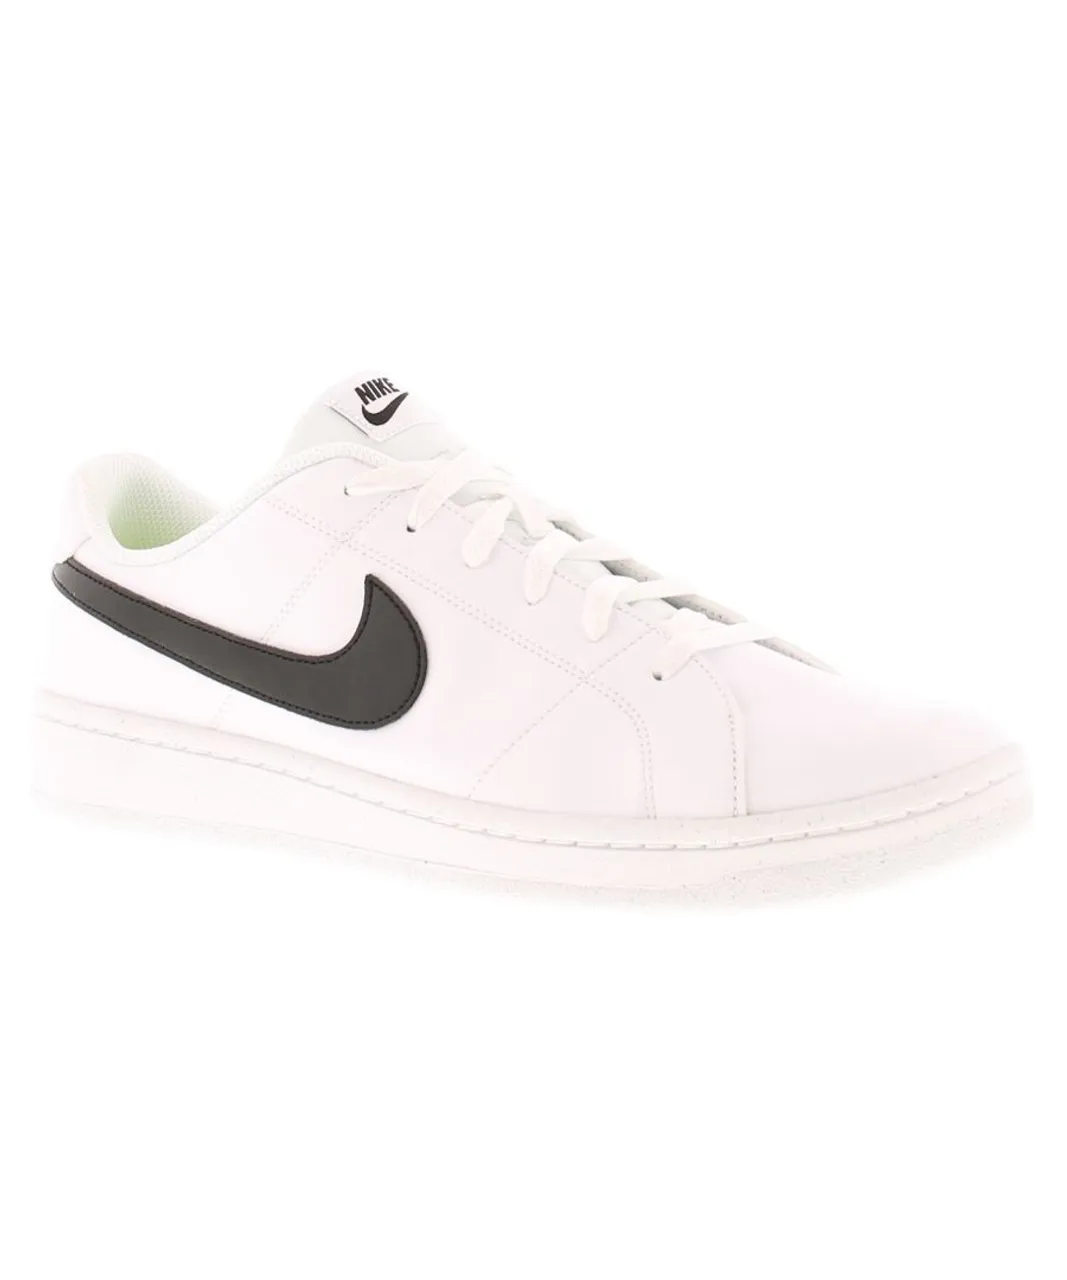 Nike Mens Skate Shoes Court Royale Lace Up white